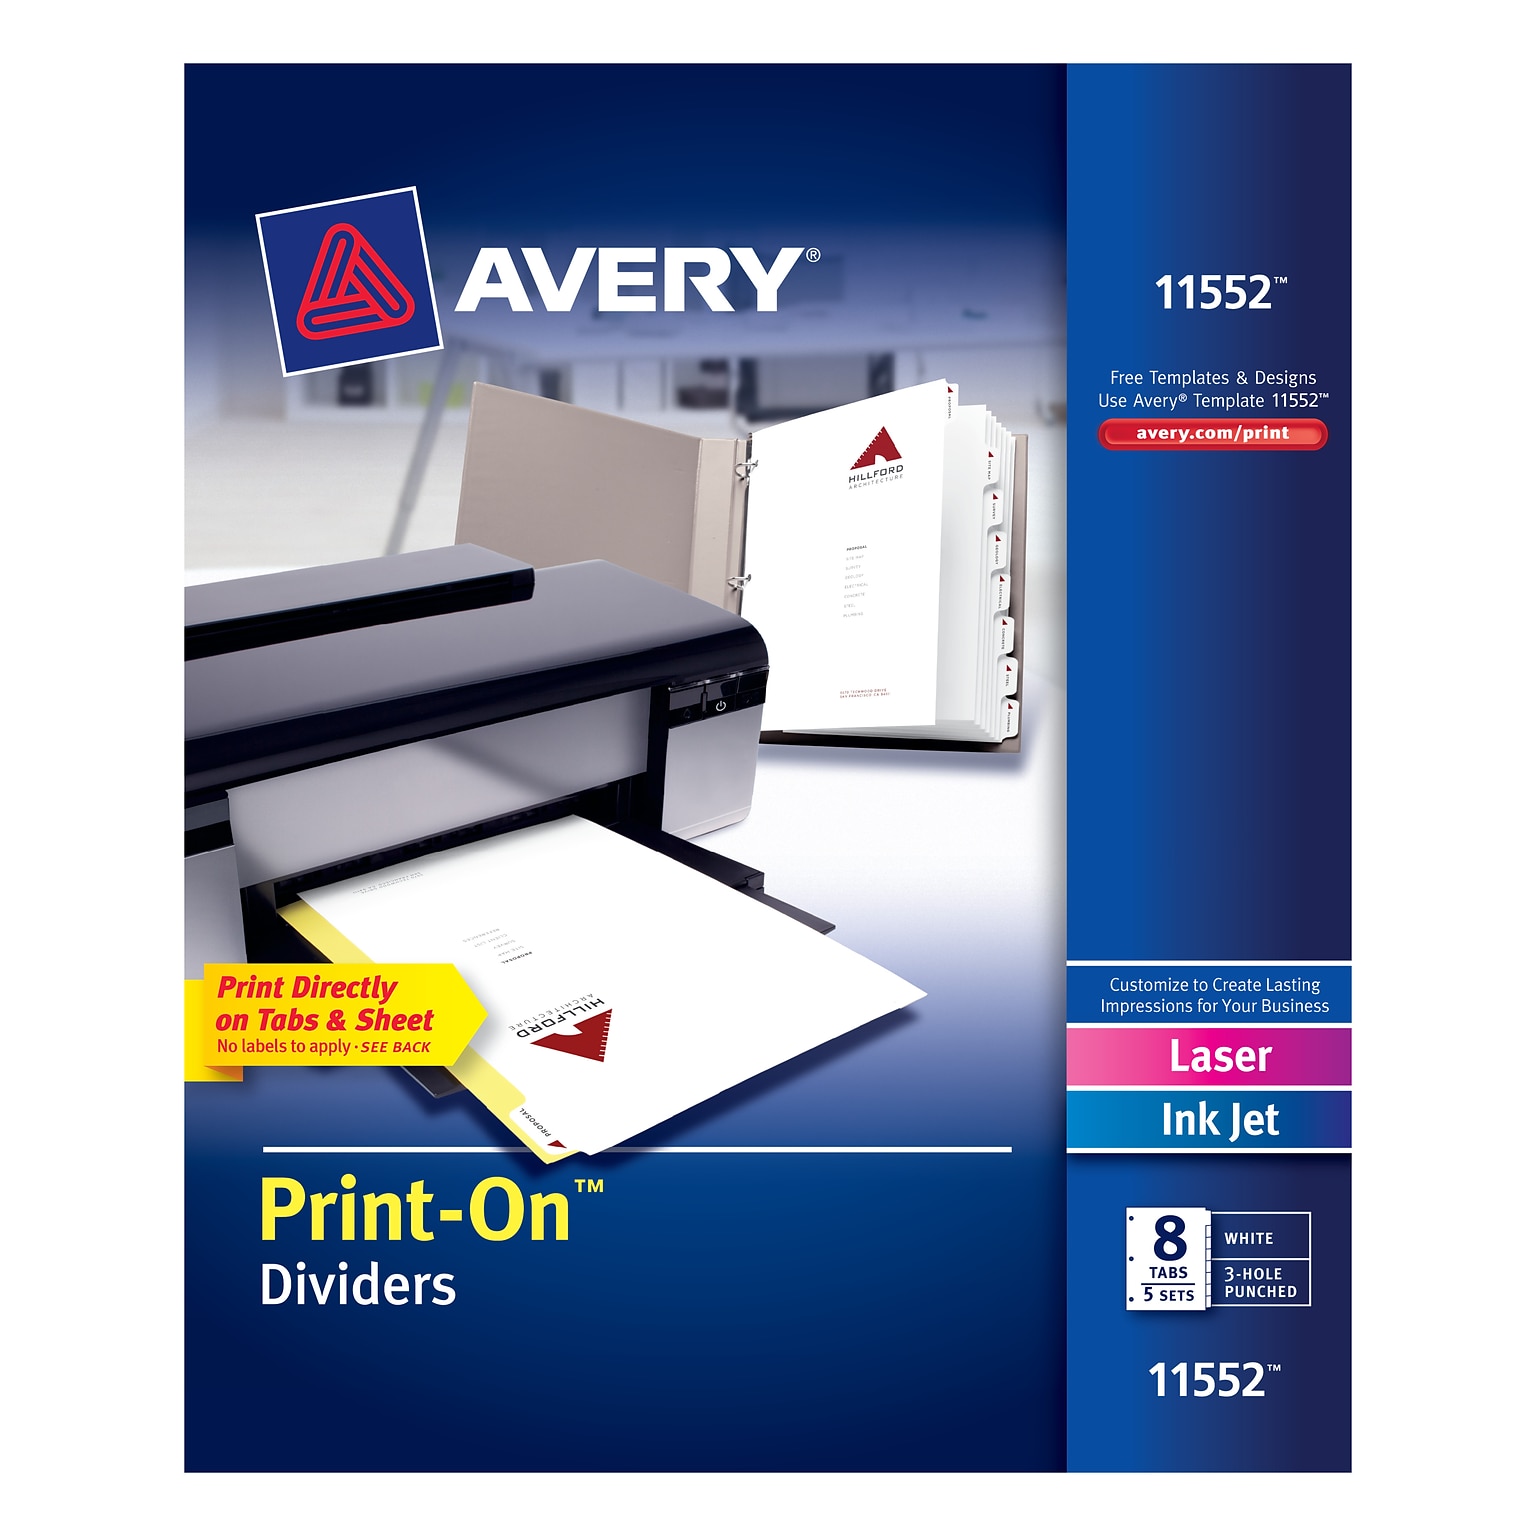 Avery Print-On Paper Dividers, 8 Tabs, White, 5 Sets/Pack (11552)